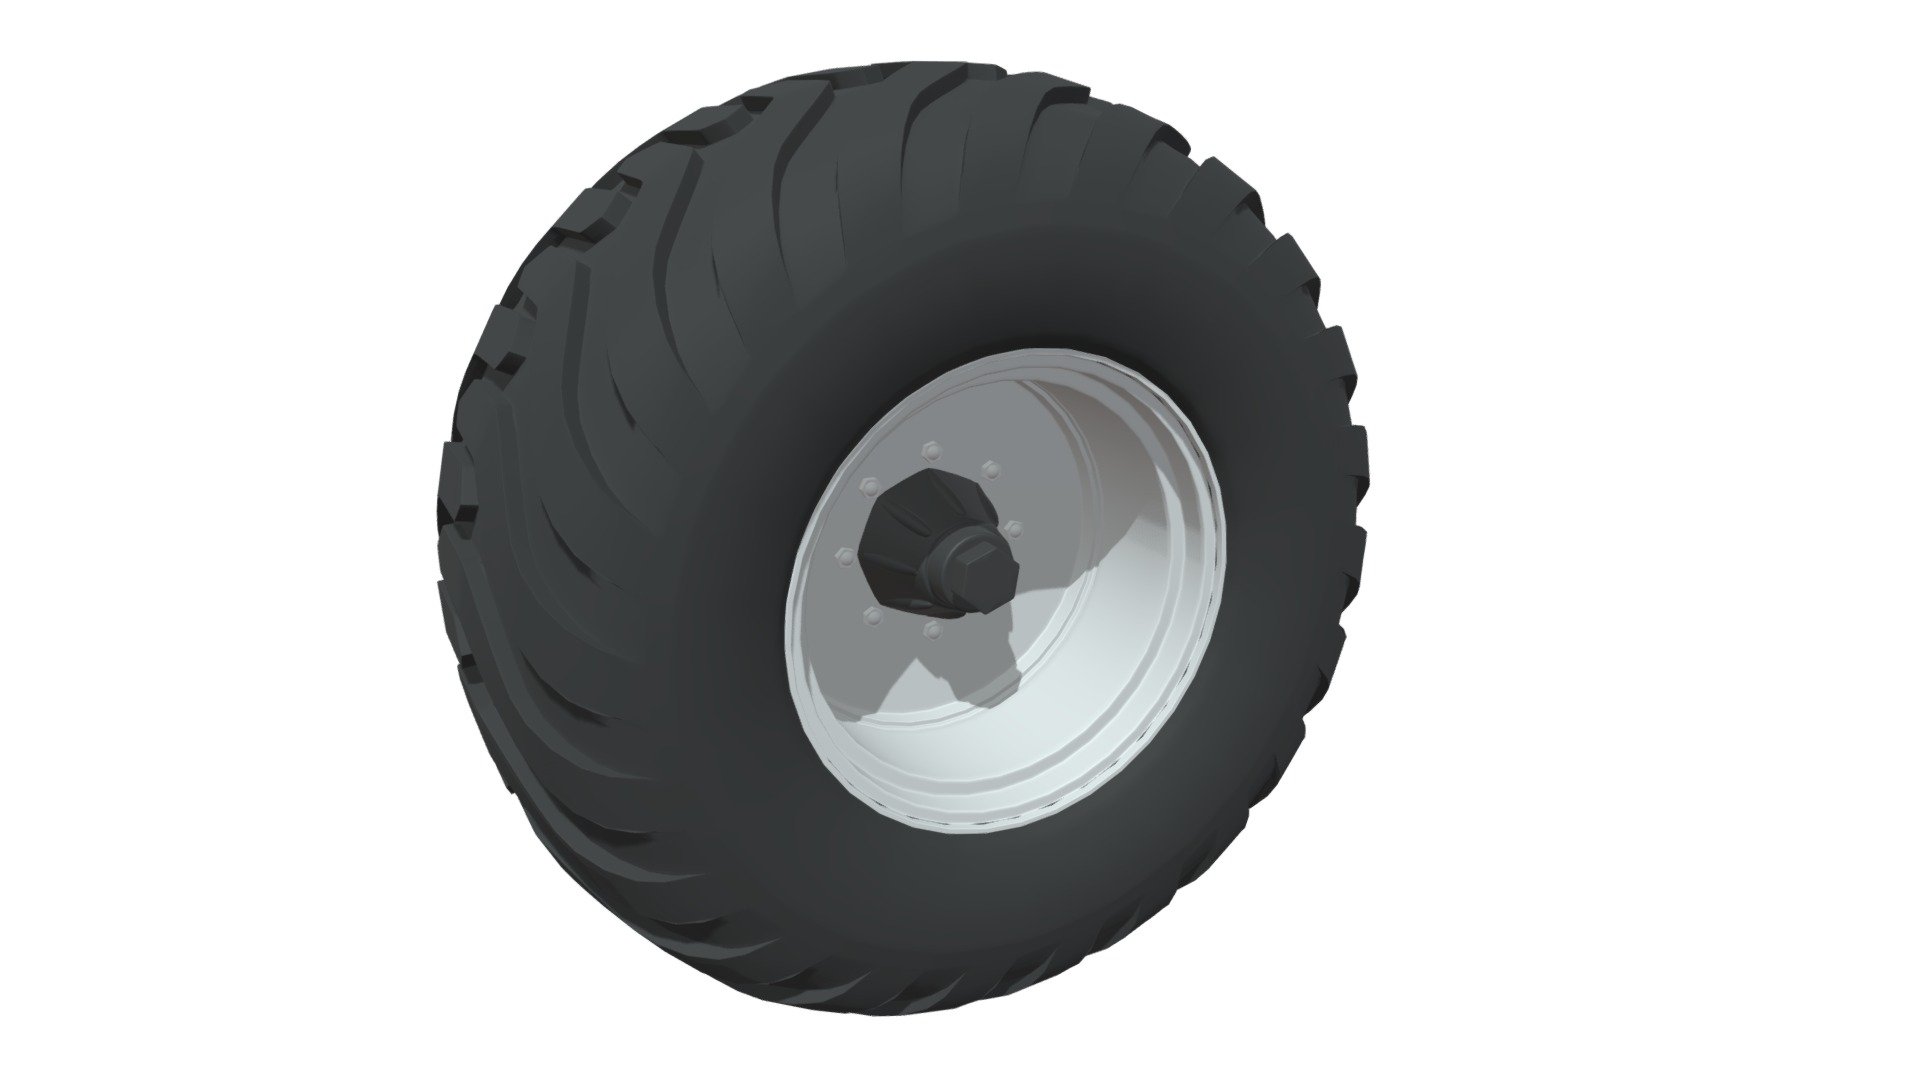 High quality 3d model of an off road tire 3d model